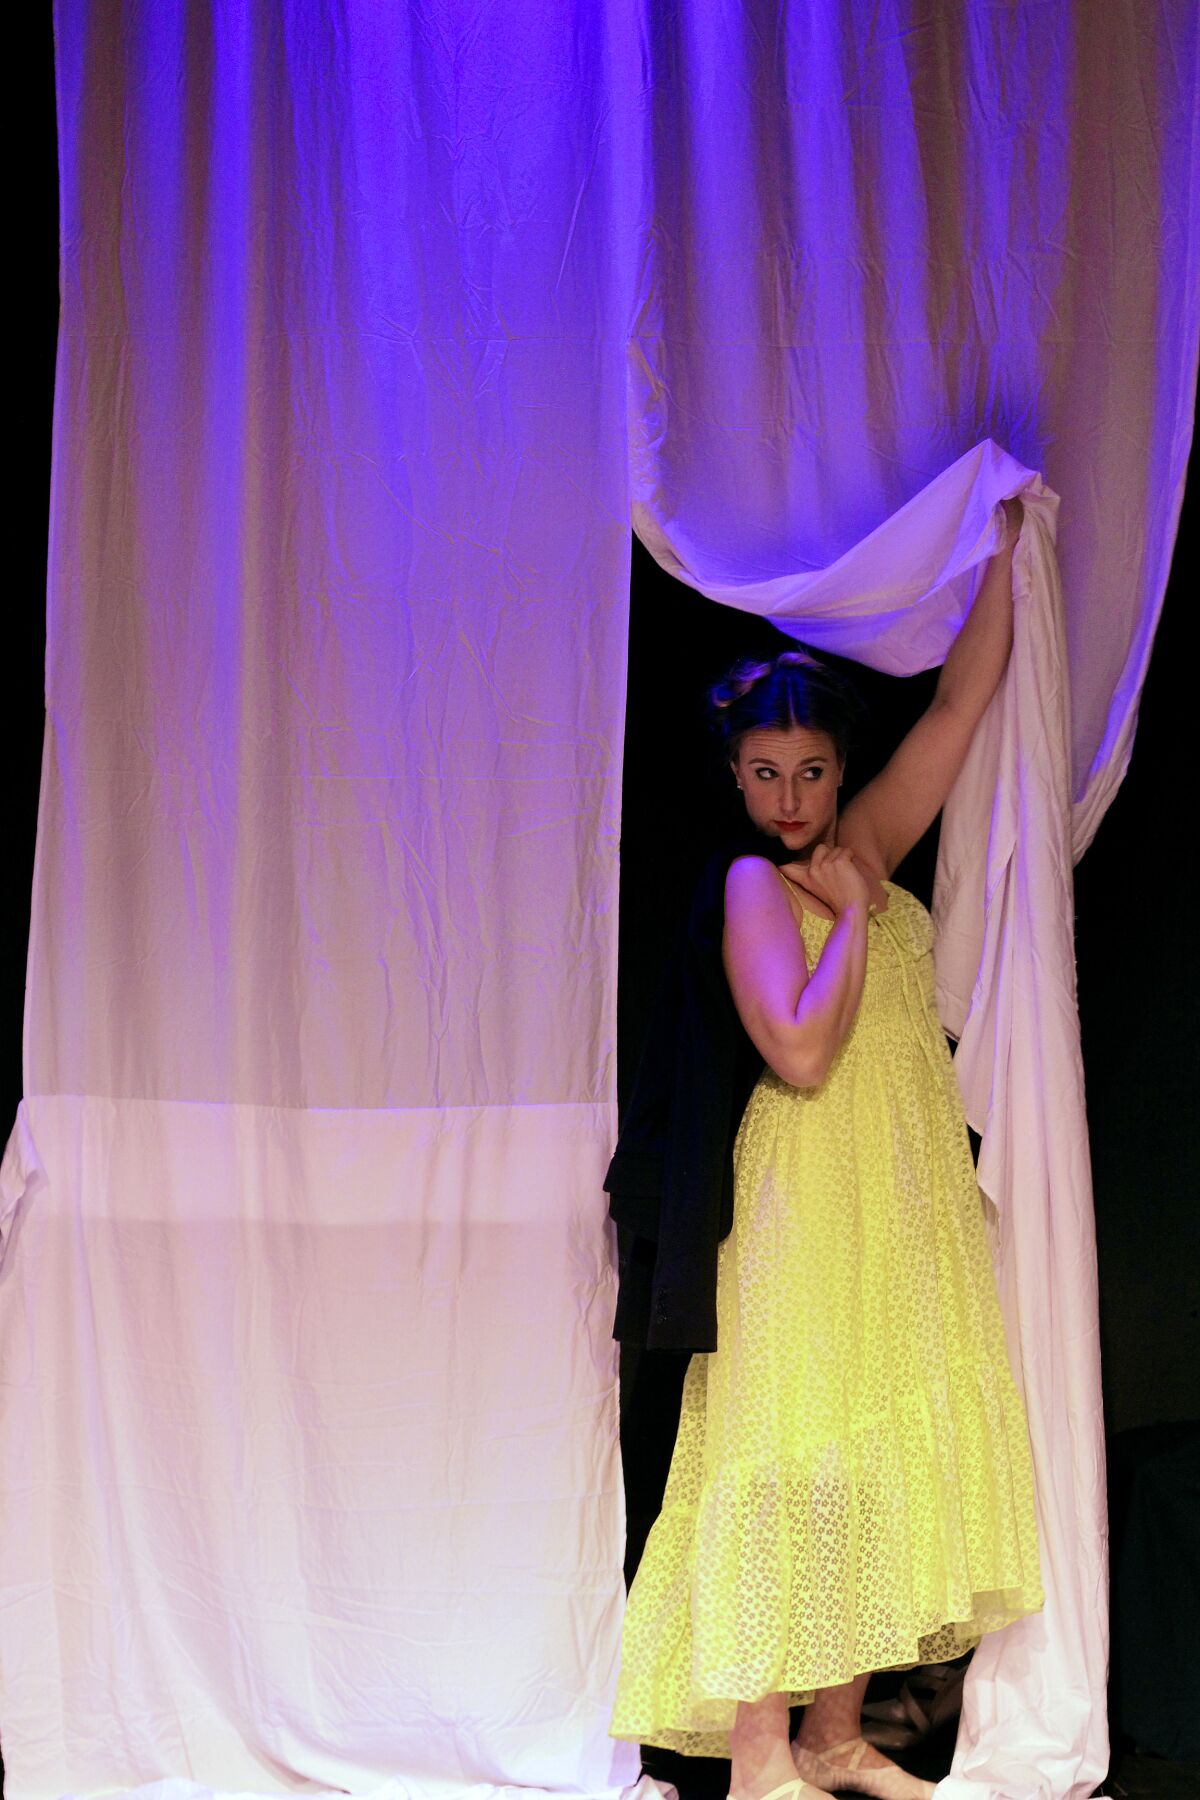 A woman in a yellow gown peeks around a curtain.